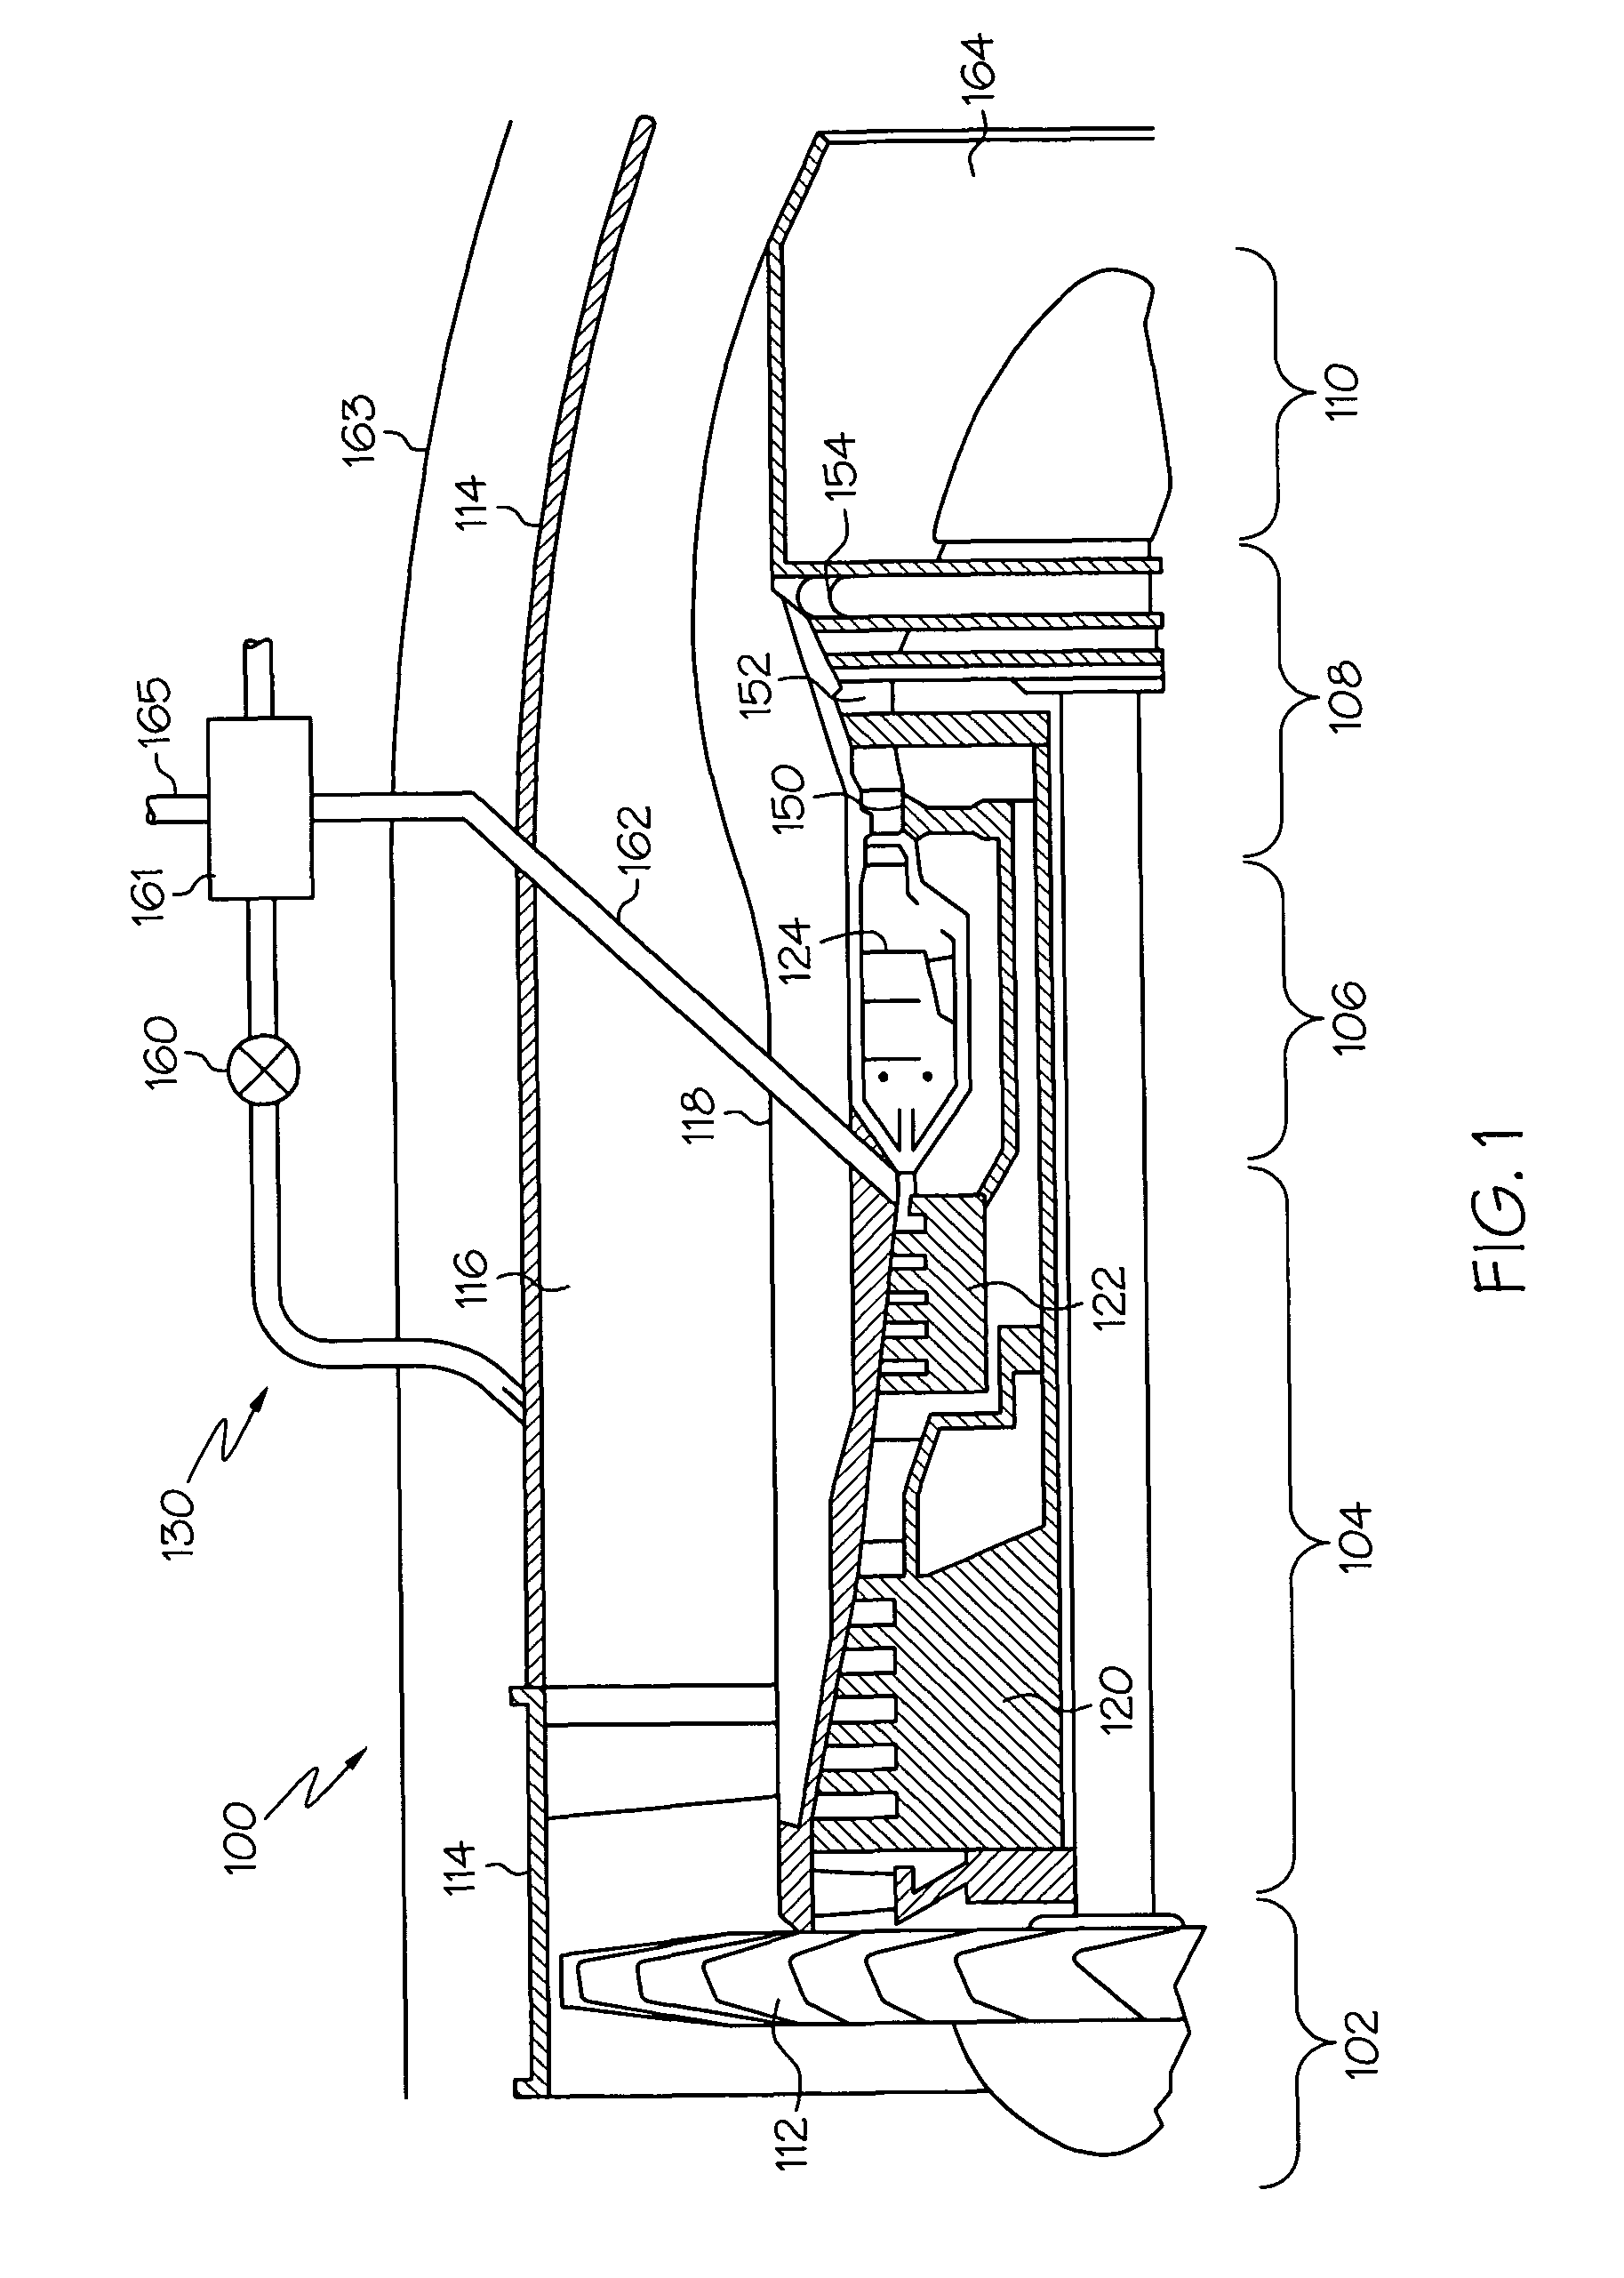 Flush inlet scoop design for aircraft bleed air system